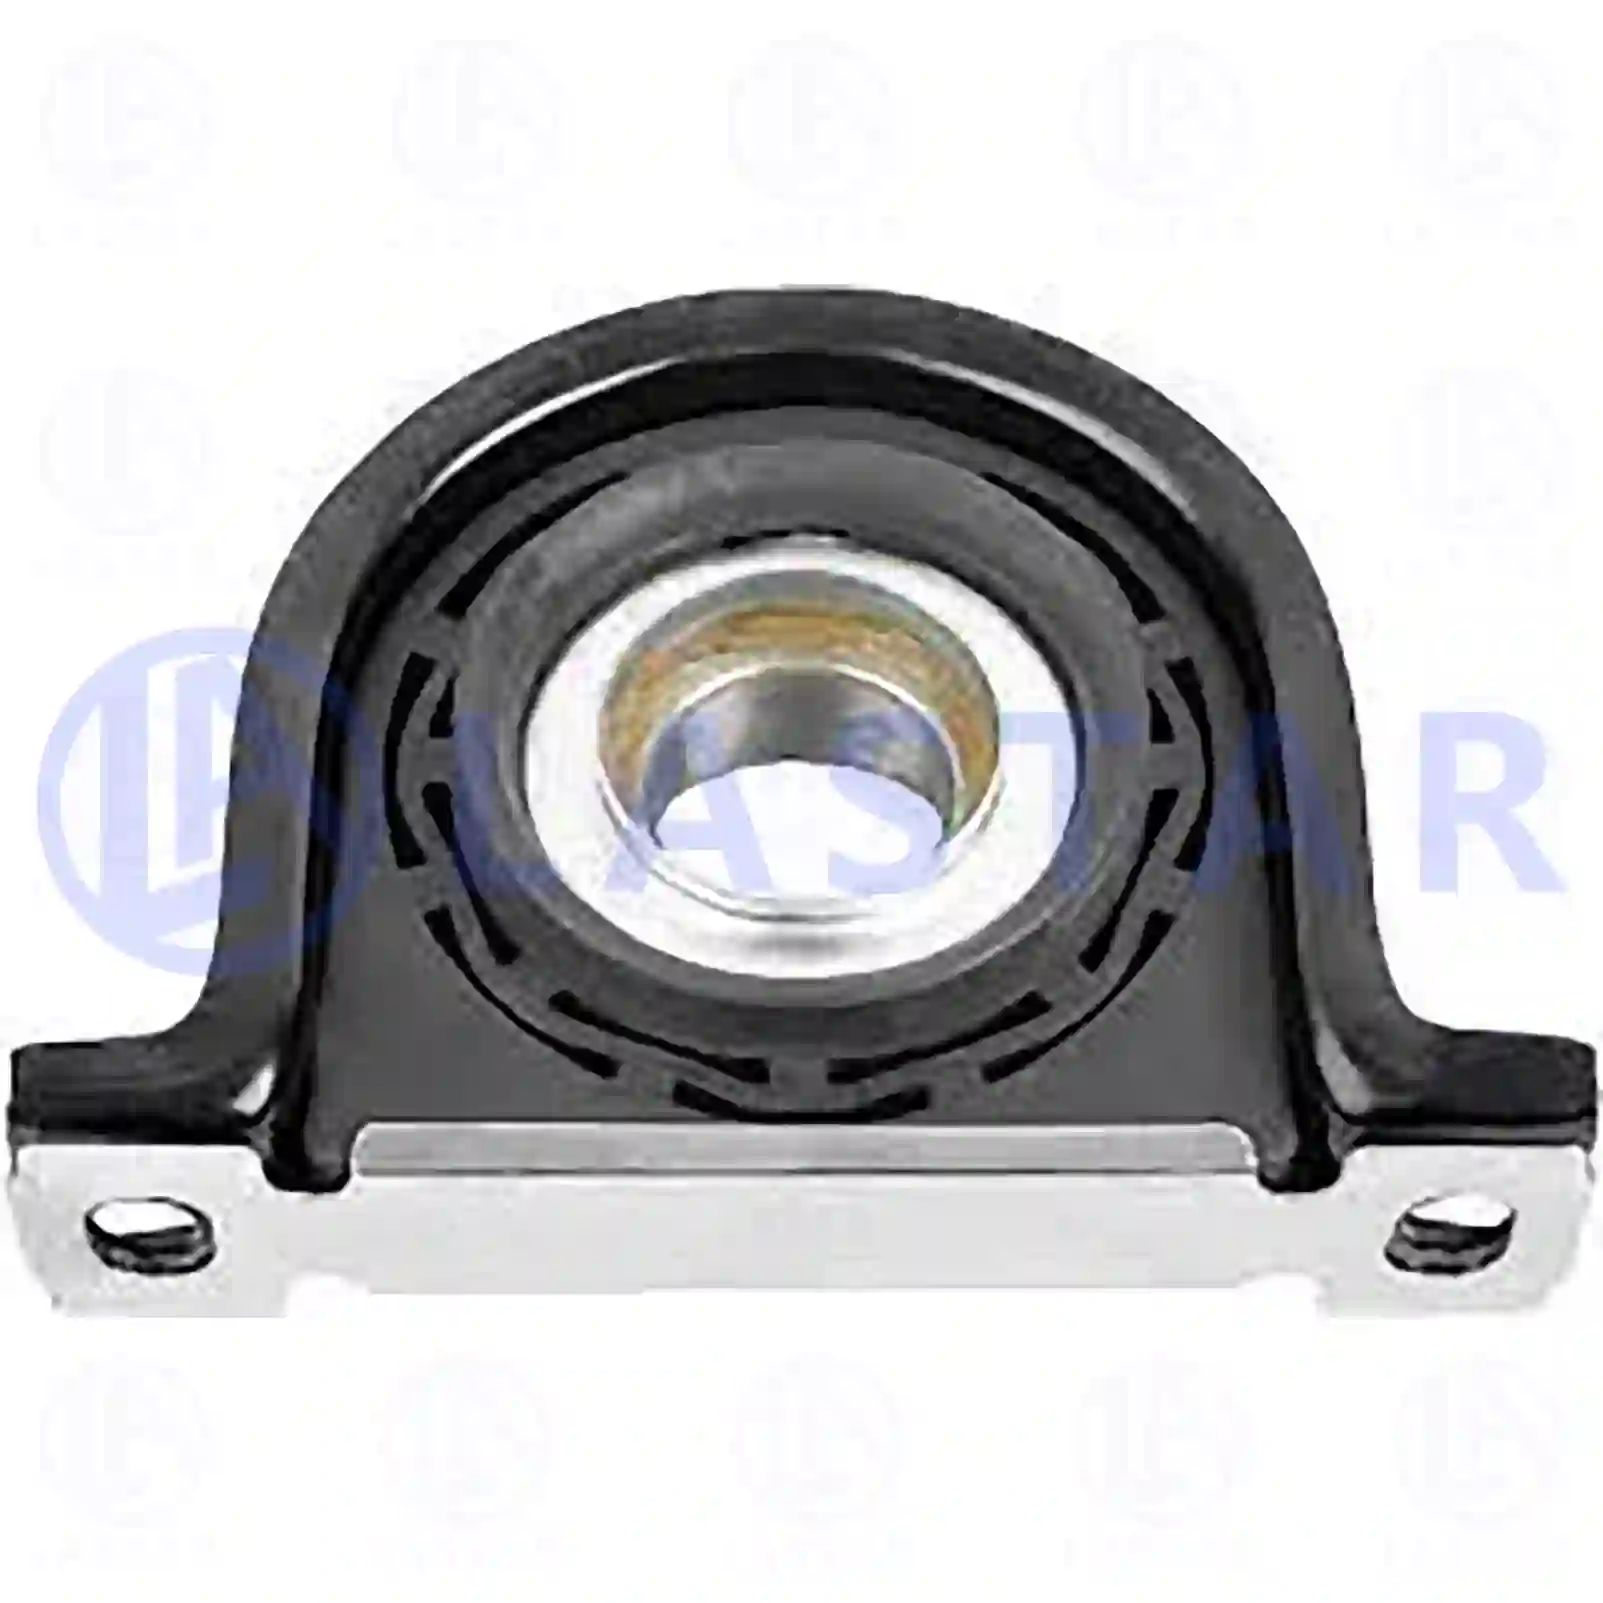 Support Bearing Center bearing, la no: 77734348 ,  oem no:42536965, 9316022 Lastar Spare Part | Truck Spare Parts, Auotomotive Spare Parts